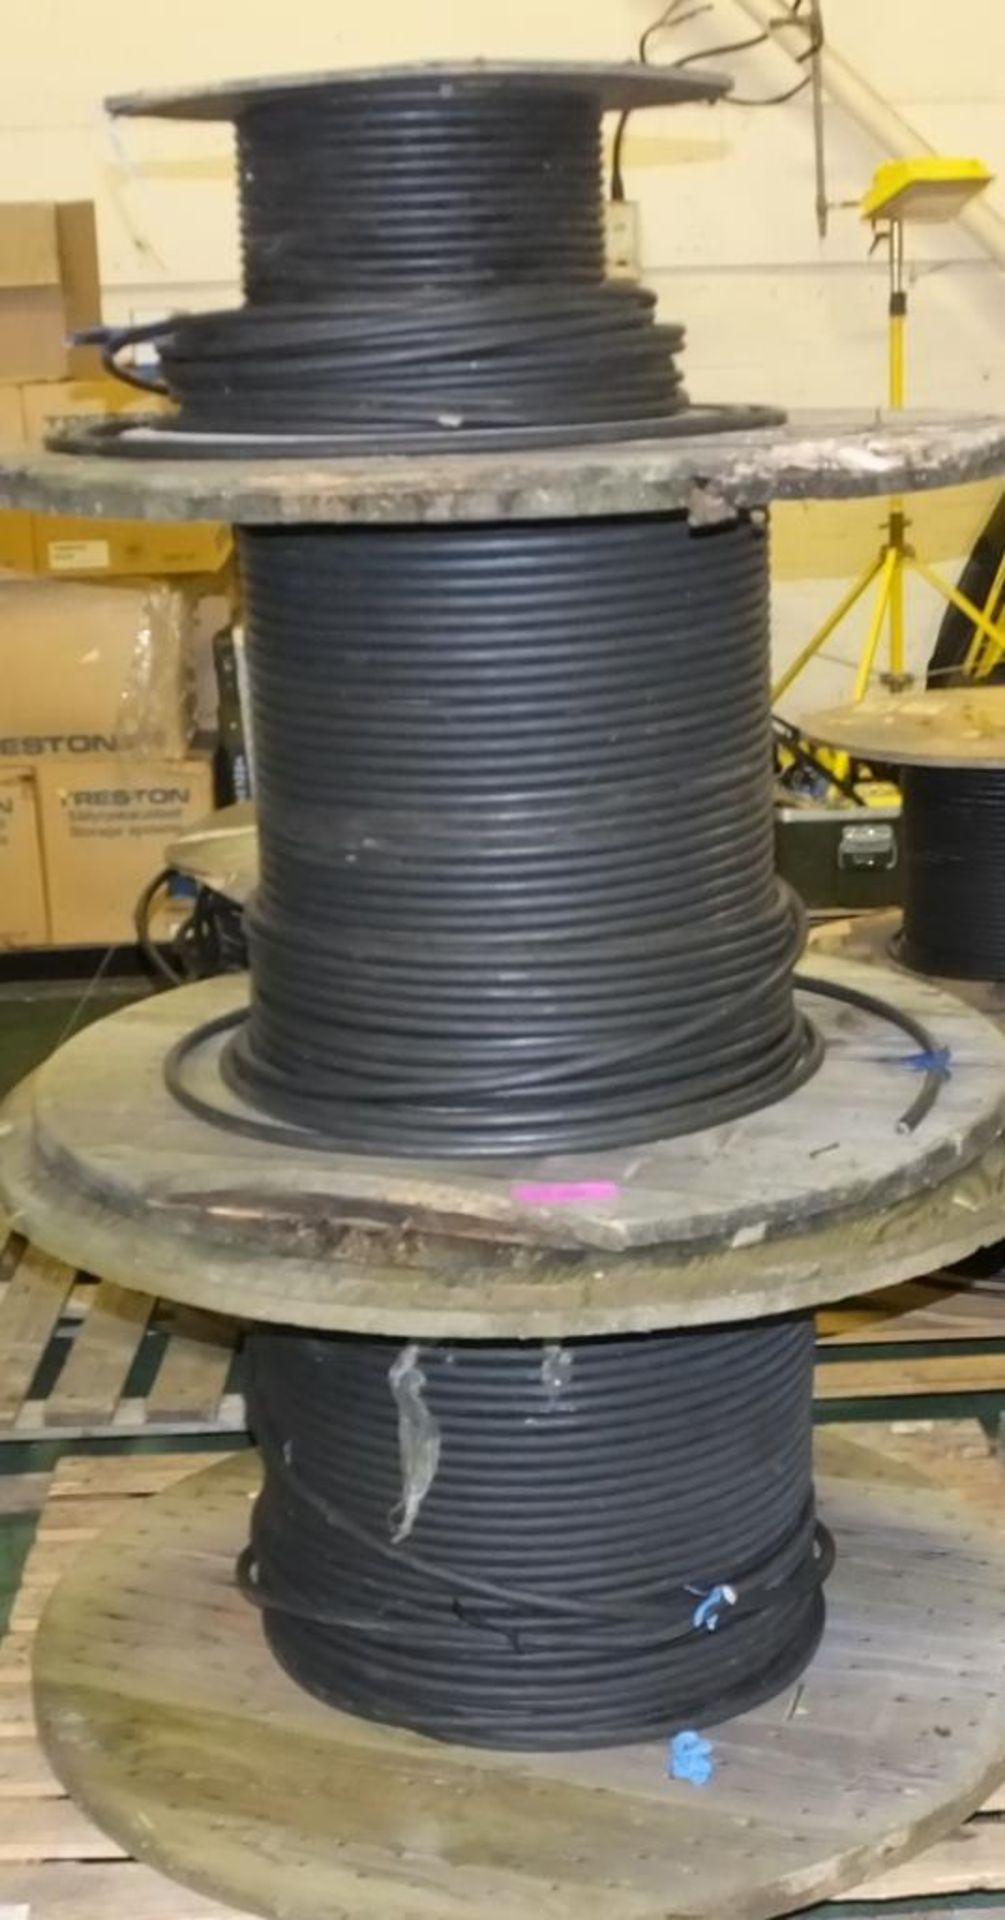 Part Reel of Cable. Part Reel of Cable. Part Reel of Cable.